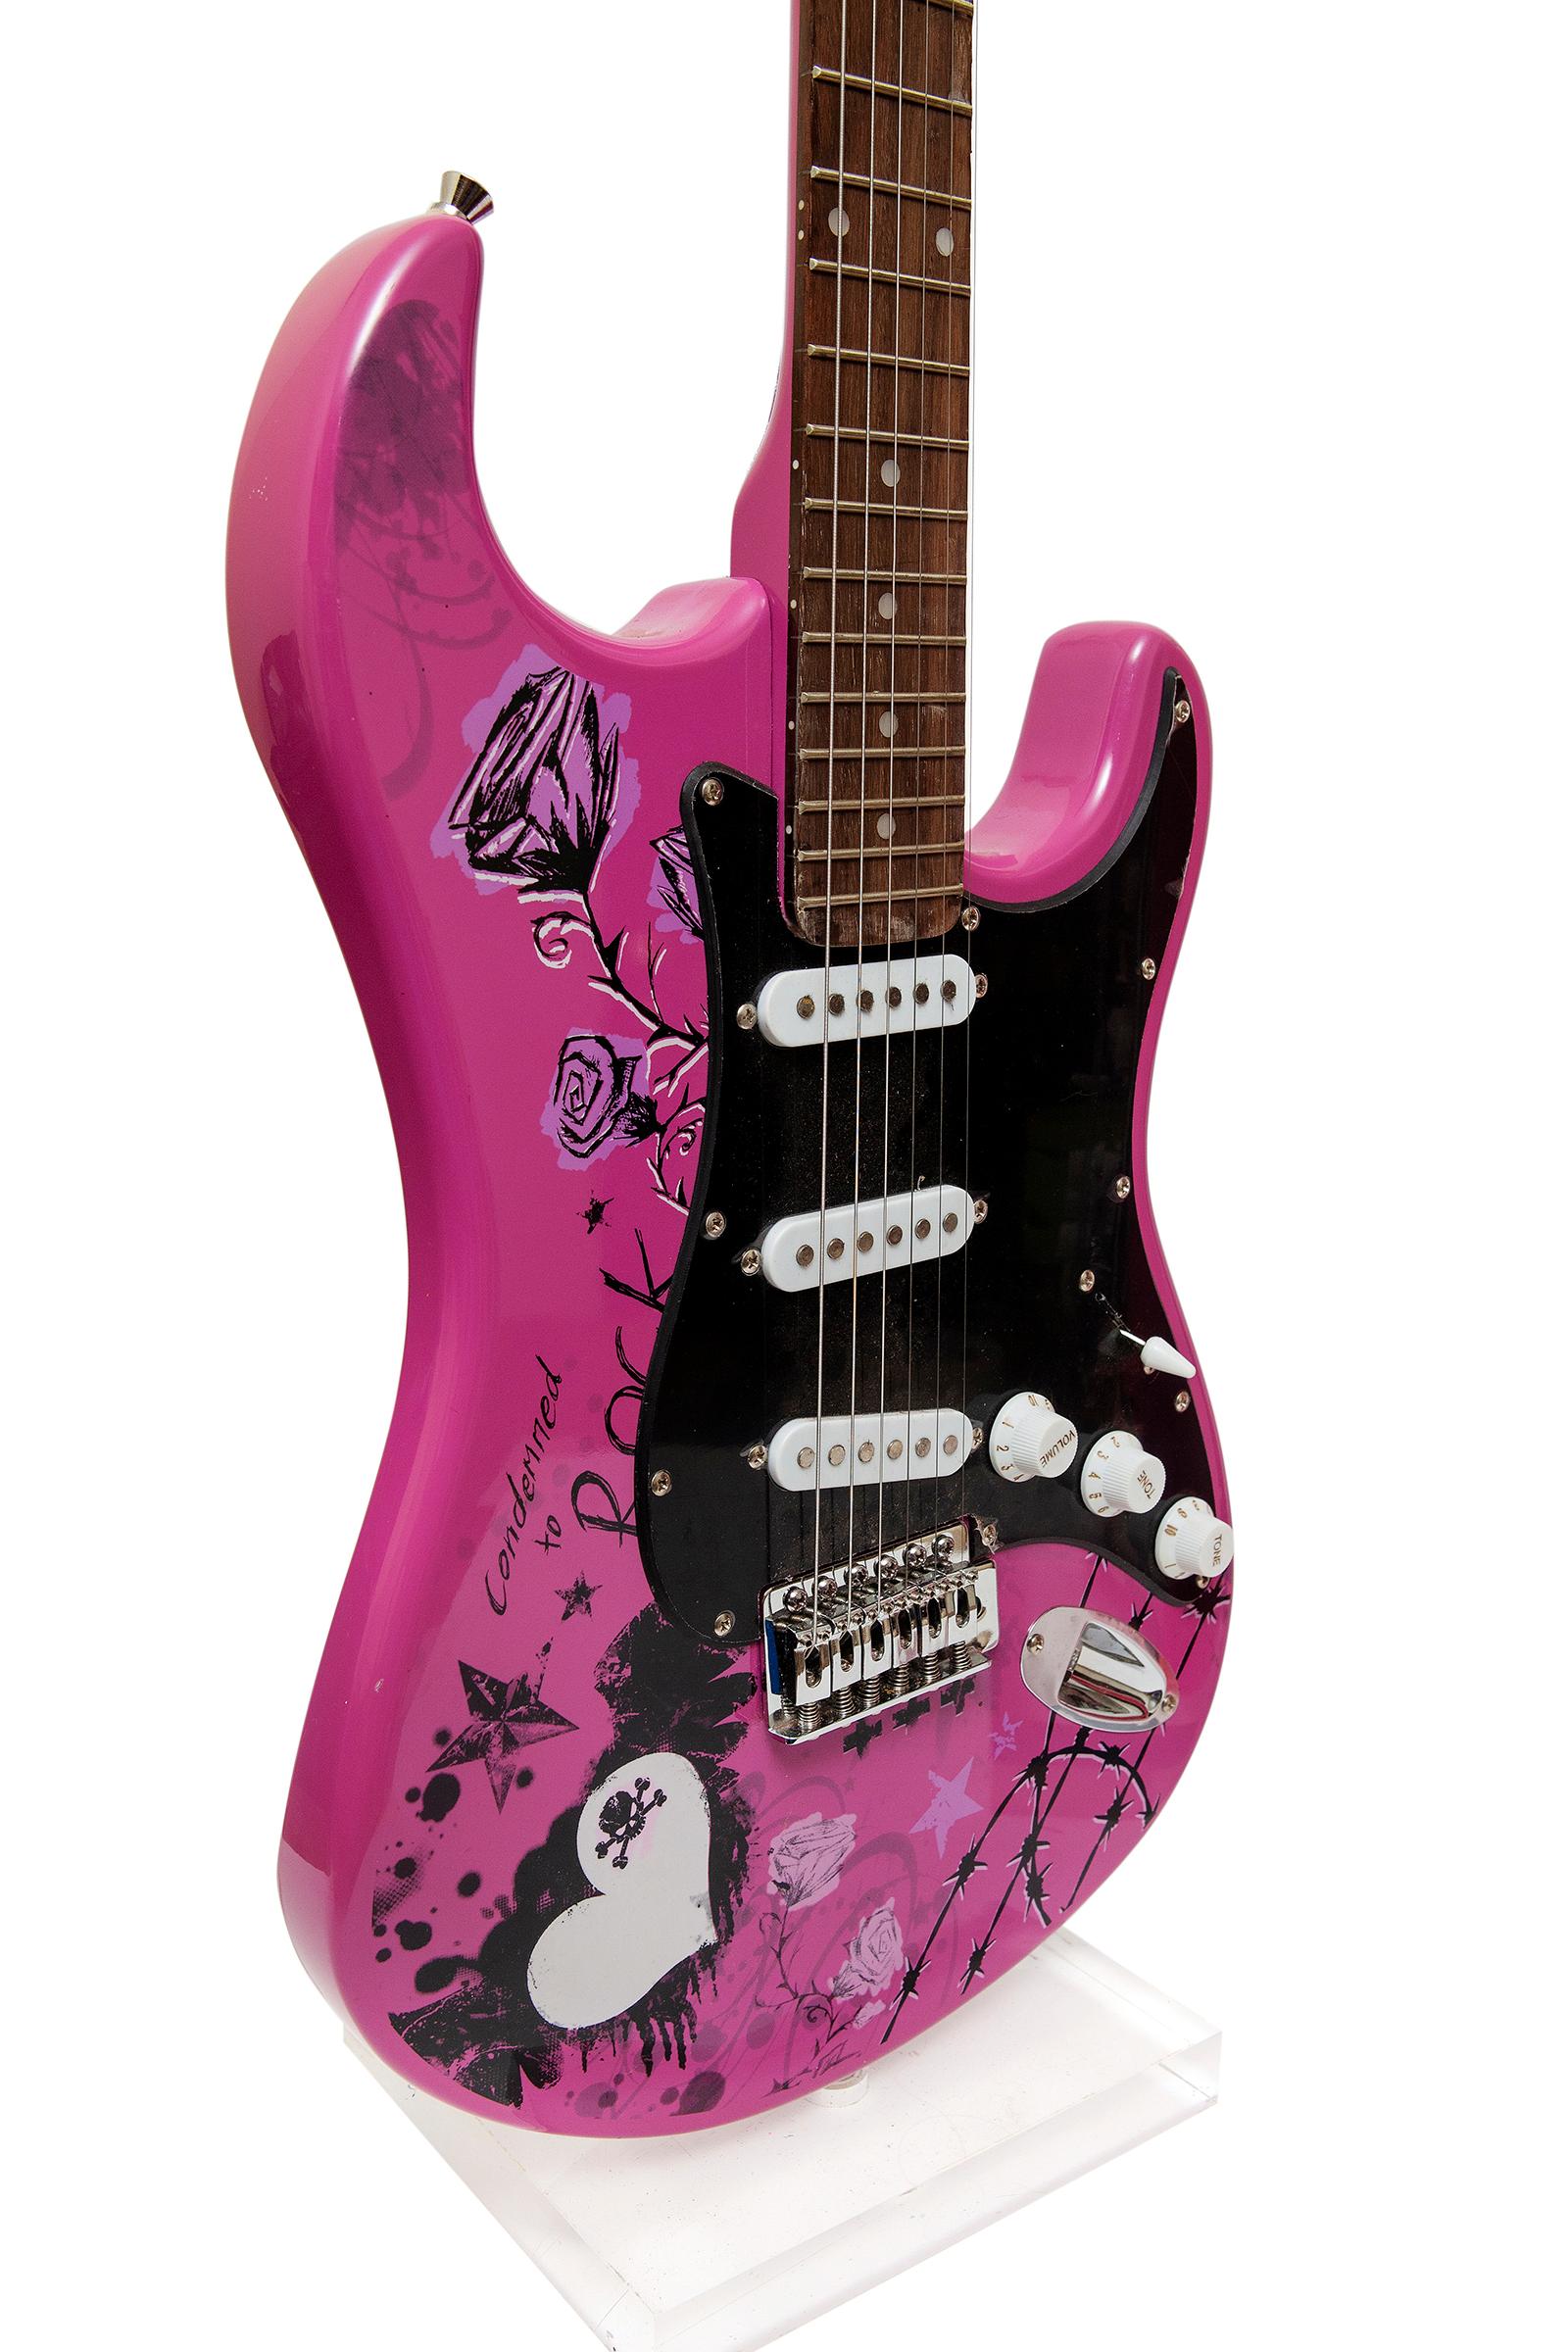 Vintage, rock and roll or punk enthusiasts lamp or guitar that can easily be strummed or played. Upcycled from a vintage purple punk kick-ass guitar for the discerning rock chick. Oozing attitude and style, this guitar exudes personality from every